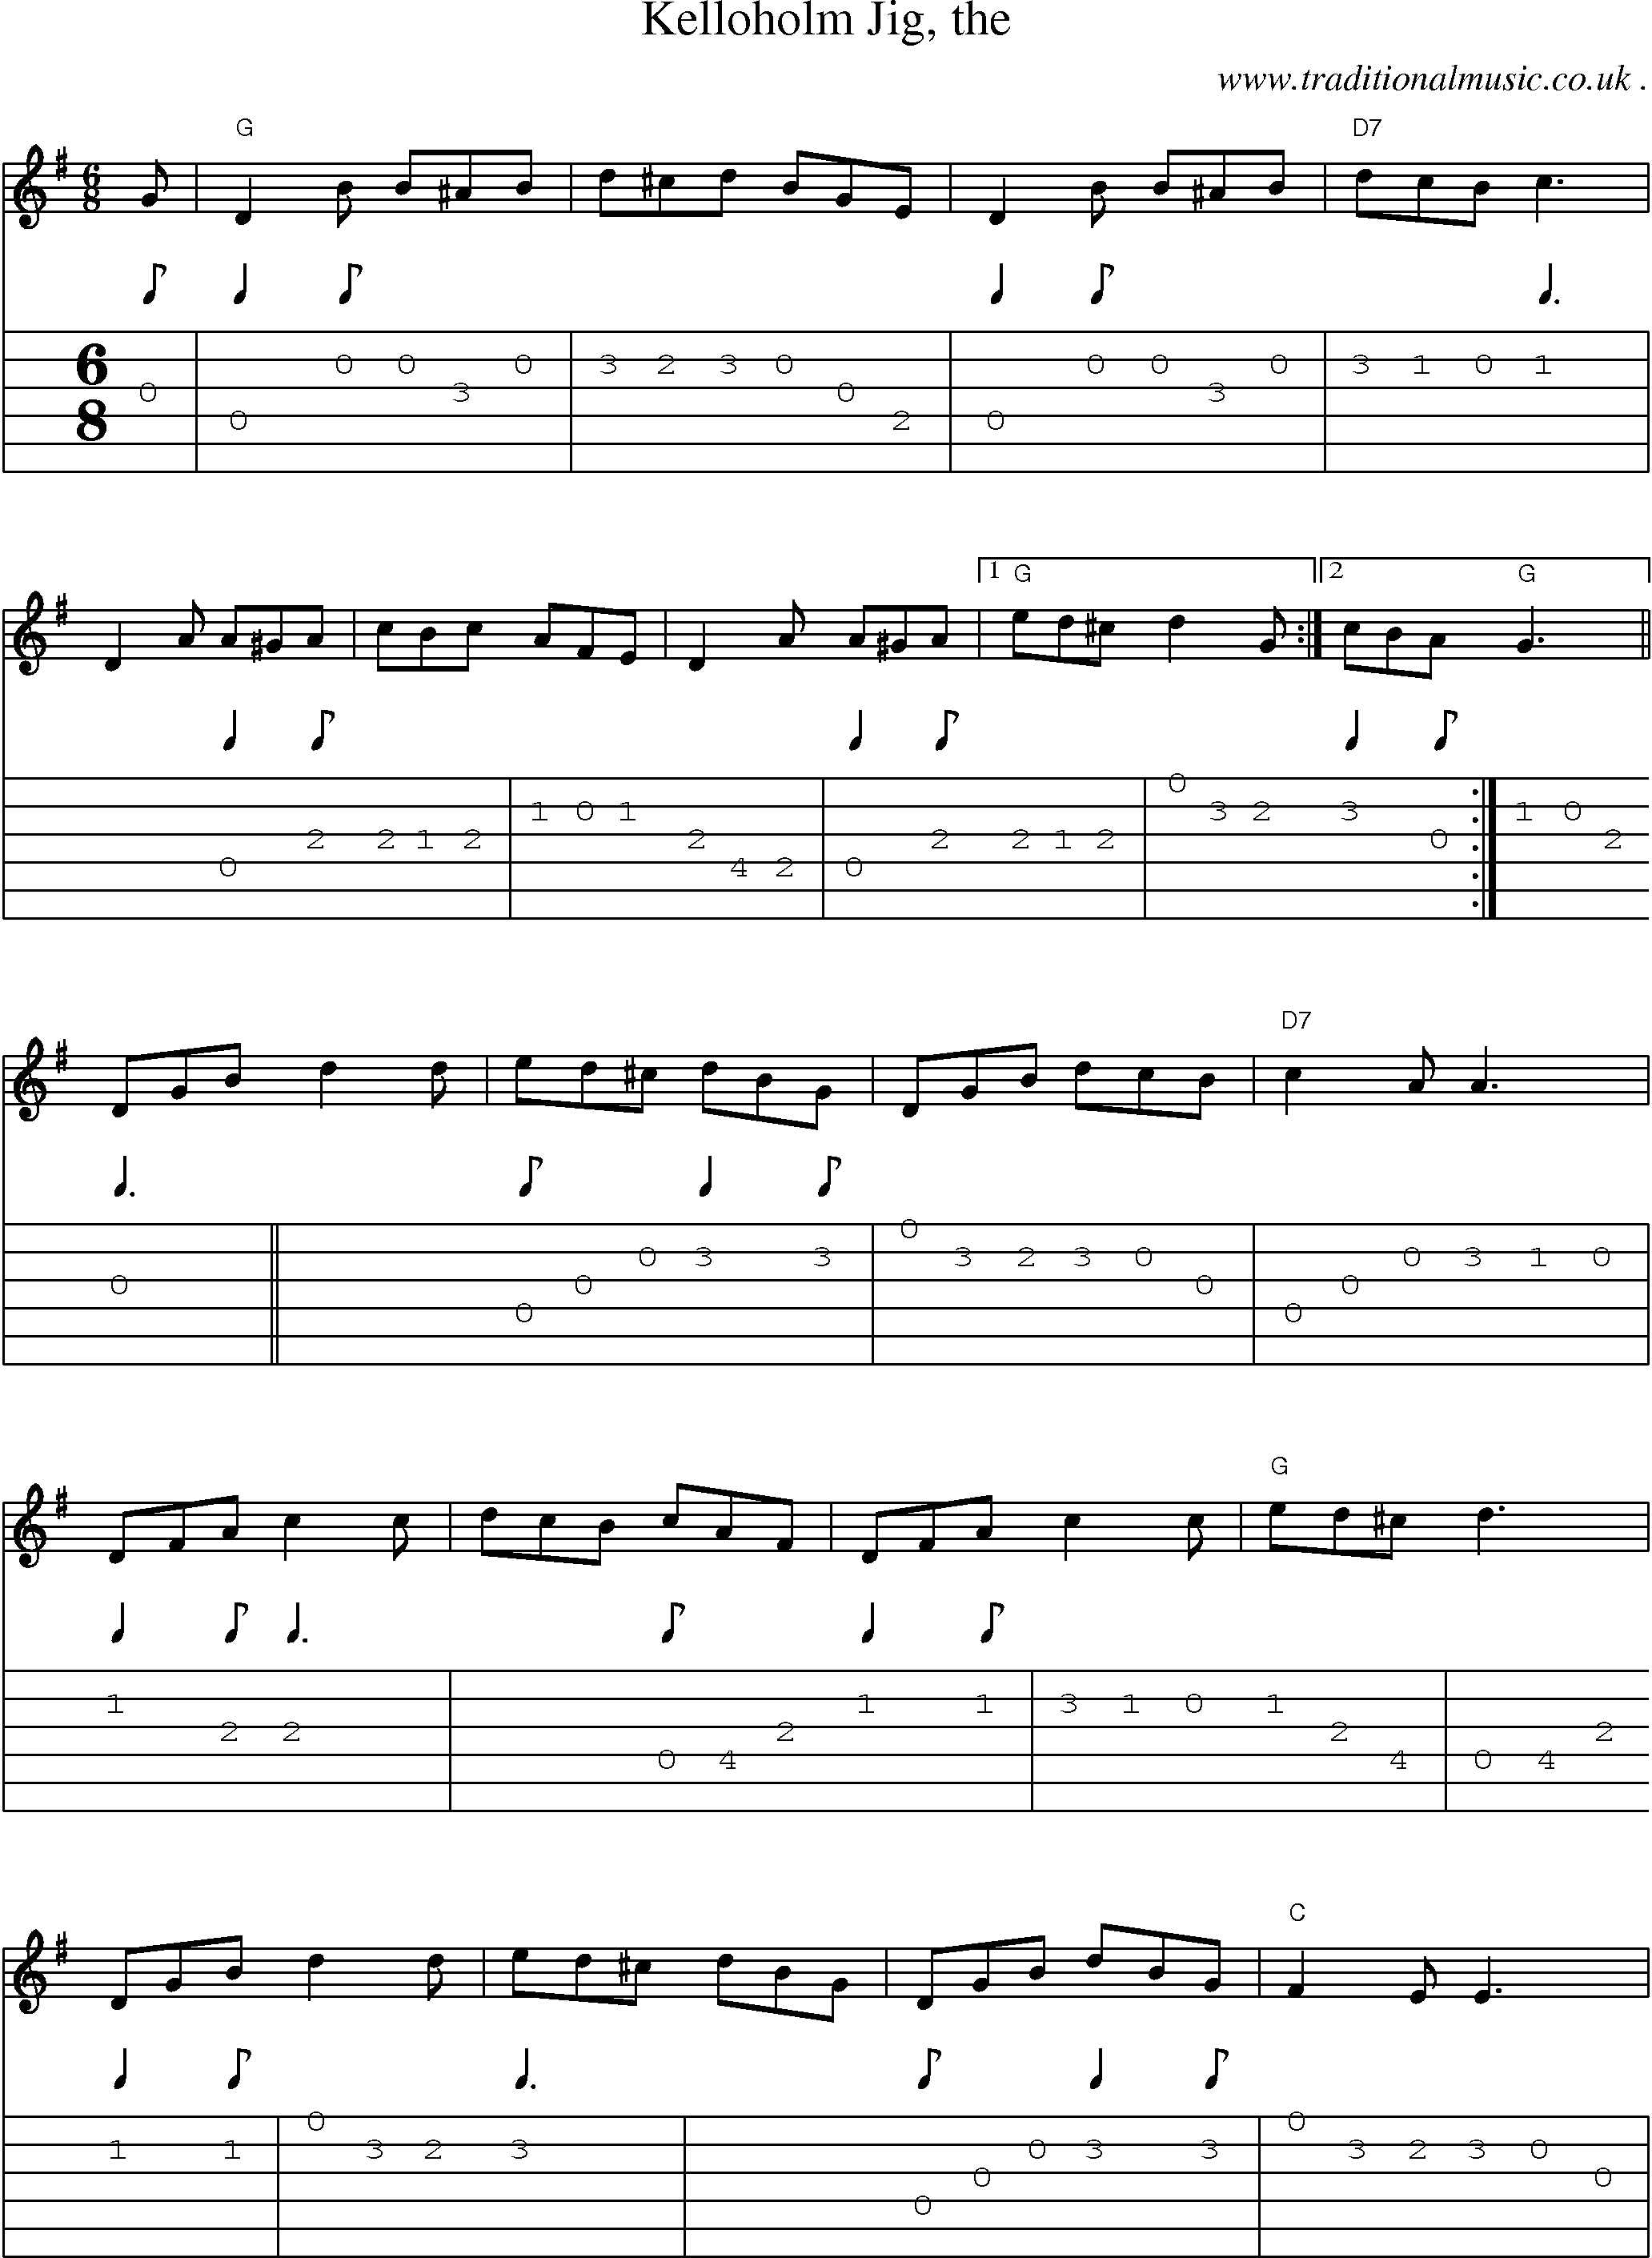 Sheet-music  score, Chords and Guitar Tabs for Kelloholm Jig The